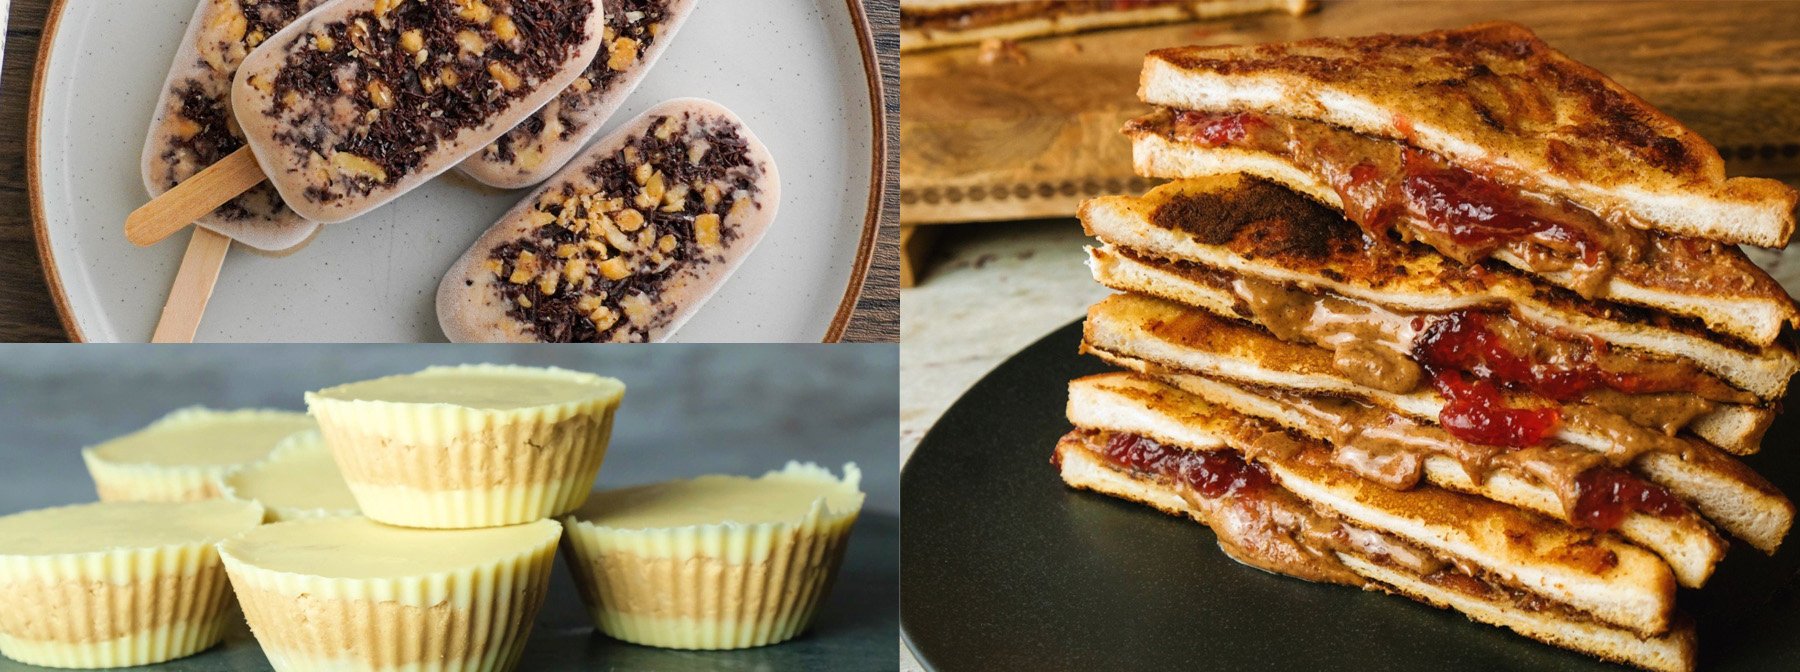 9 Recipes for Peanut Butter Lovers